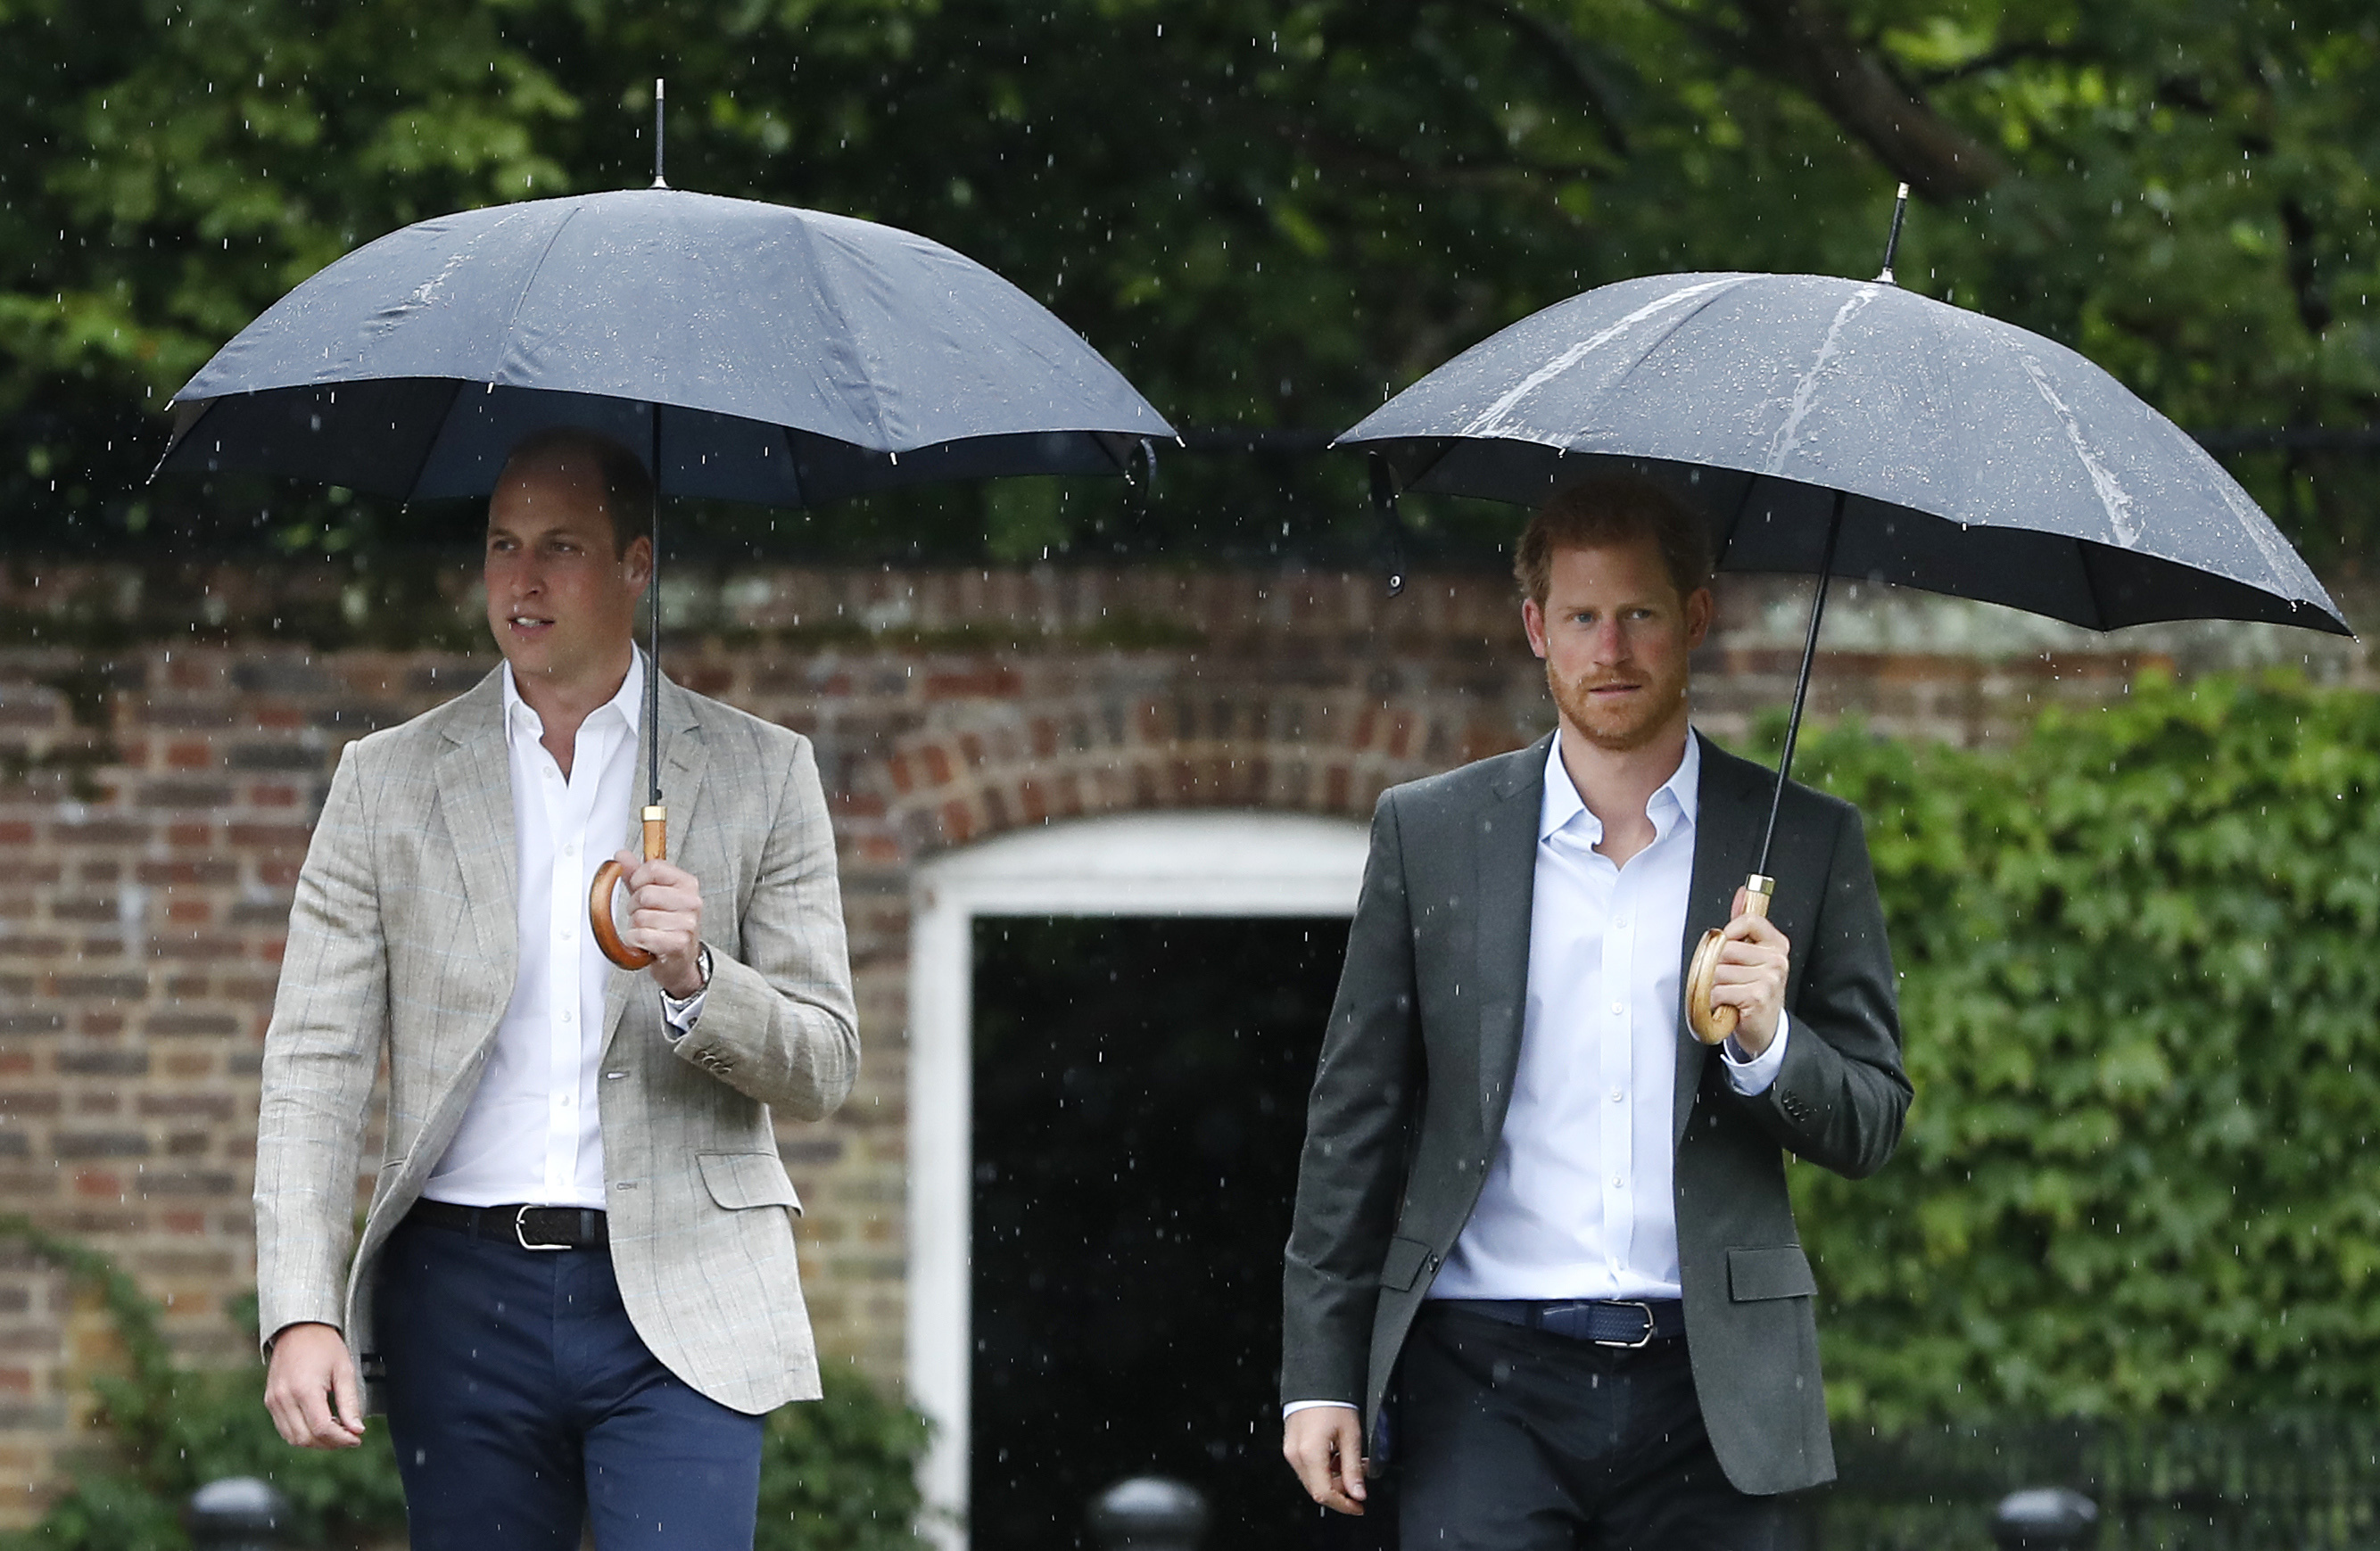 Prince William and Prince Harry are seen during a visit to The Sunken Garden at Kensington Palace